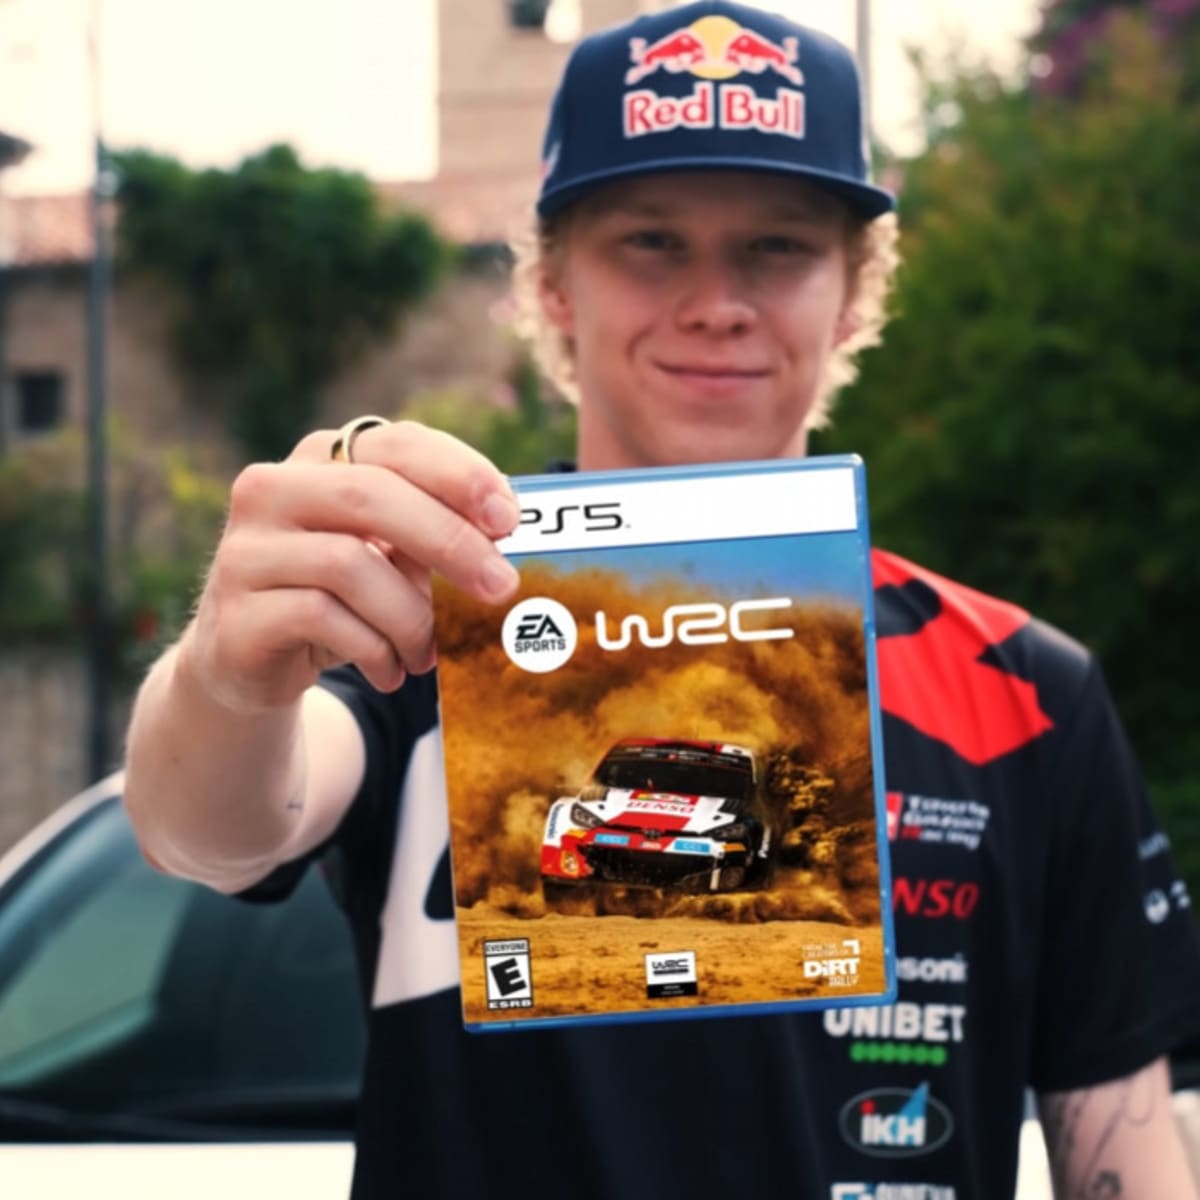 Kalle Rovanperä is 18: How Do You Become Successful in WRC 2